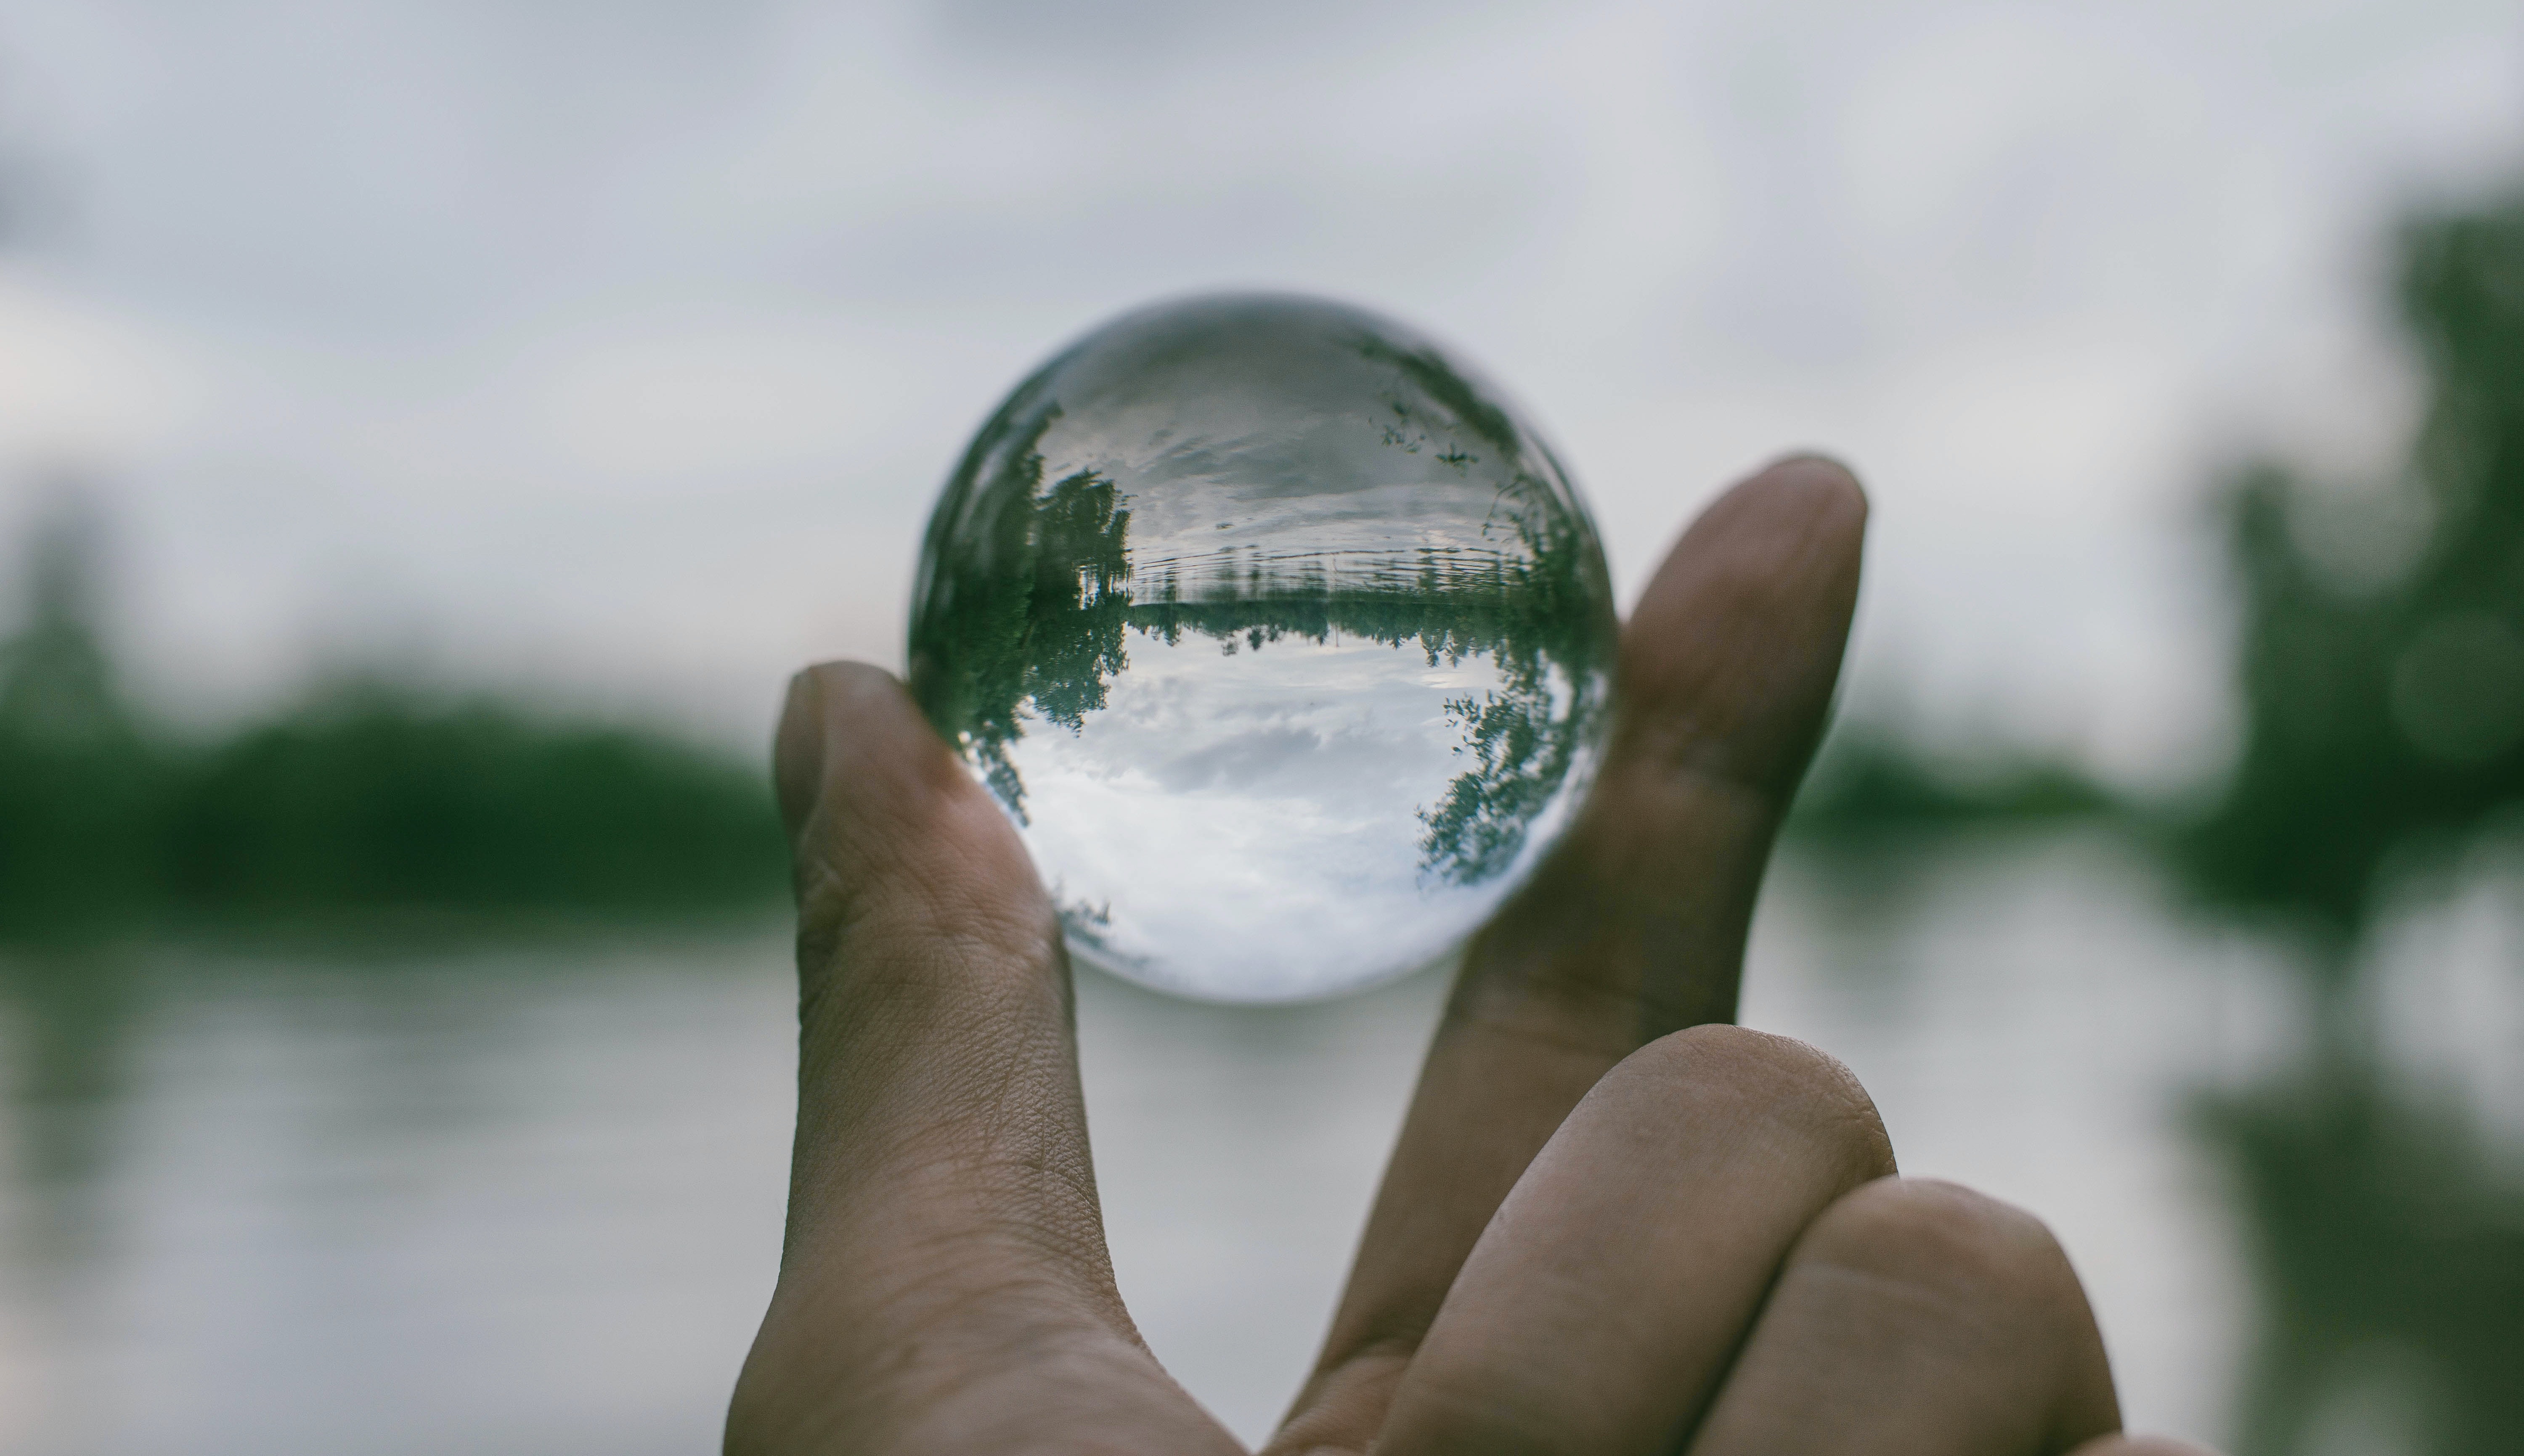 image of a hand holding transparent sphere through which the background scenery can be seen